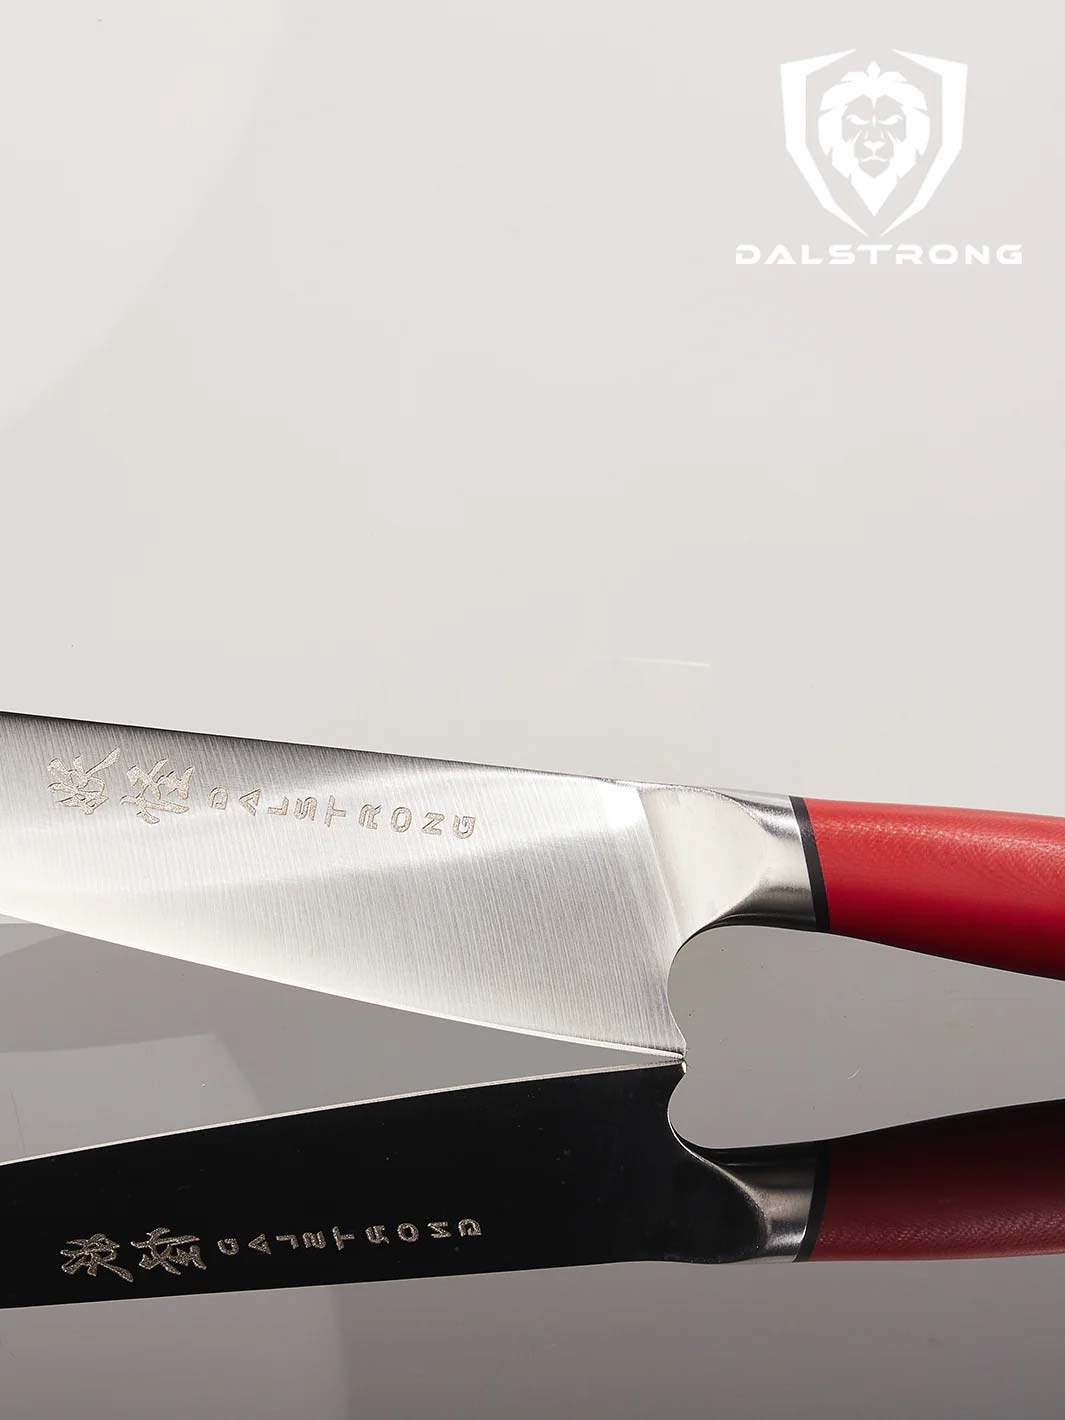 Dalstrong Chef Knife - 8 inch - Phantom Series - Japanese High-Carbon Aus8 Steel Kitchen Knife - White G10 Handle - Cooking Knife - w/Sheath